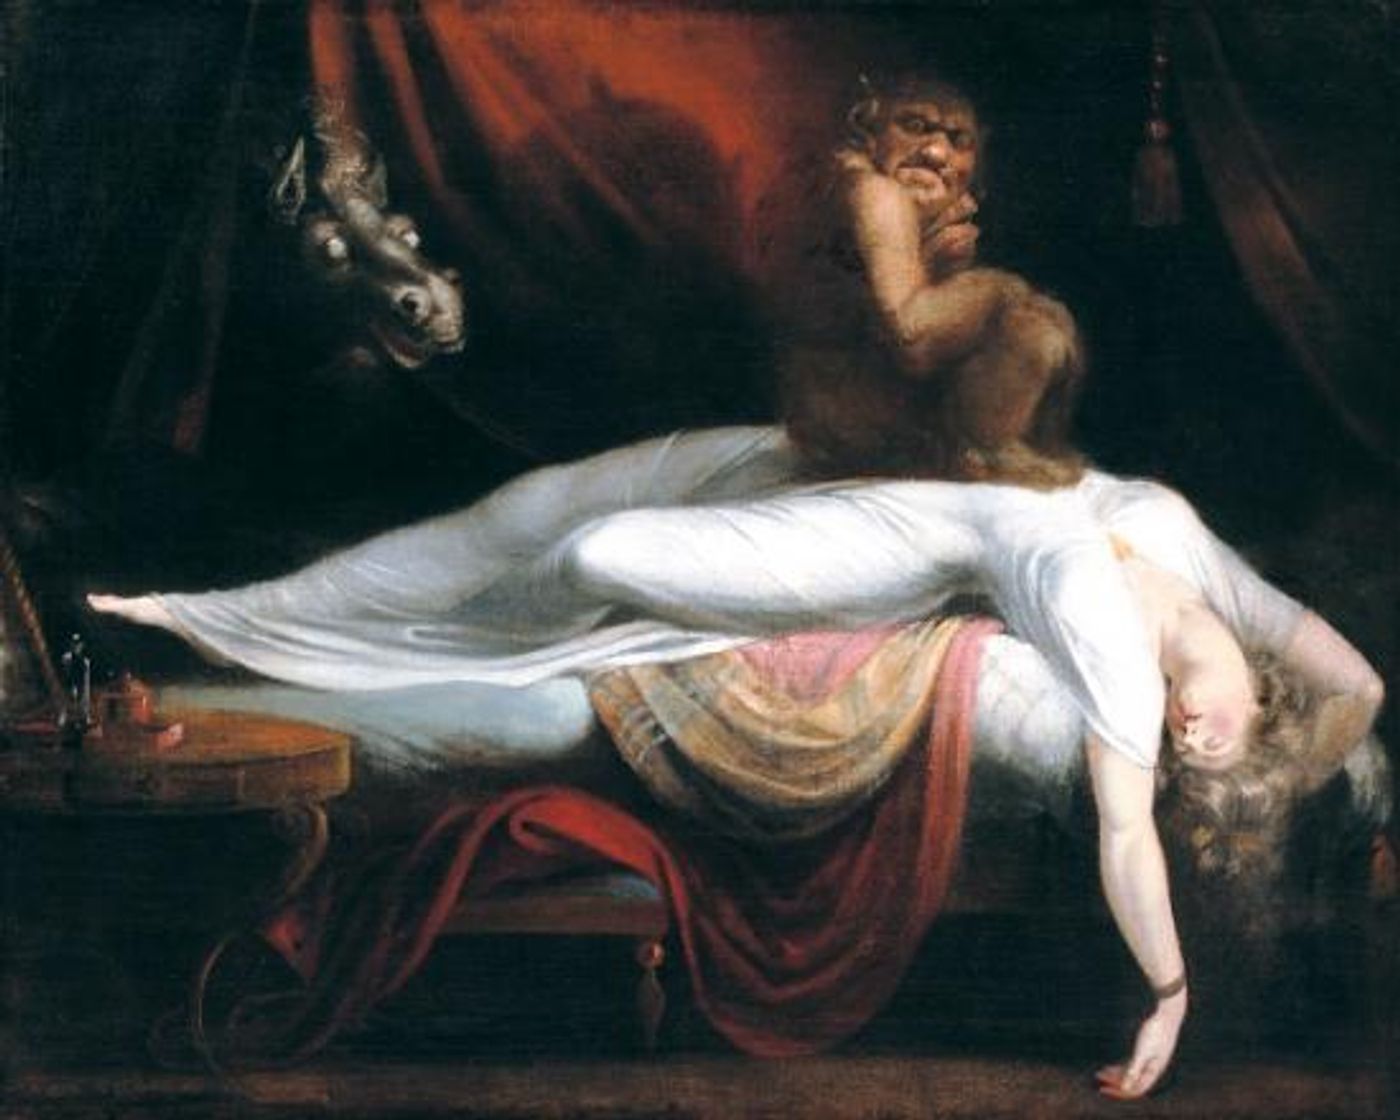 The Nightmare, by Henry Fuseli (1781) | Image: wikimedia.org